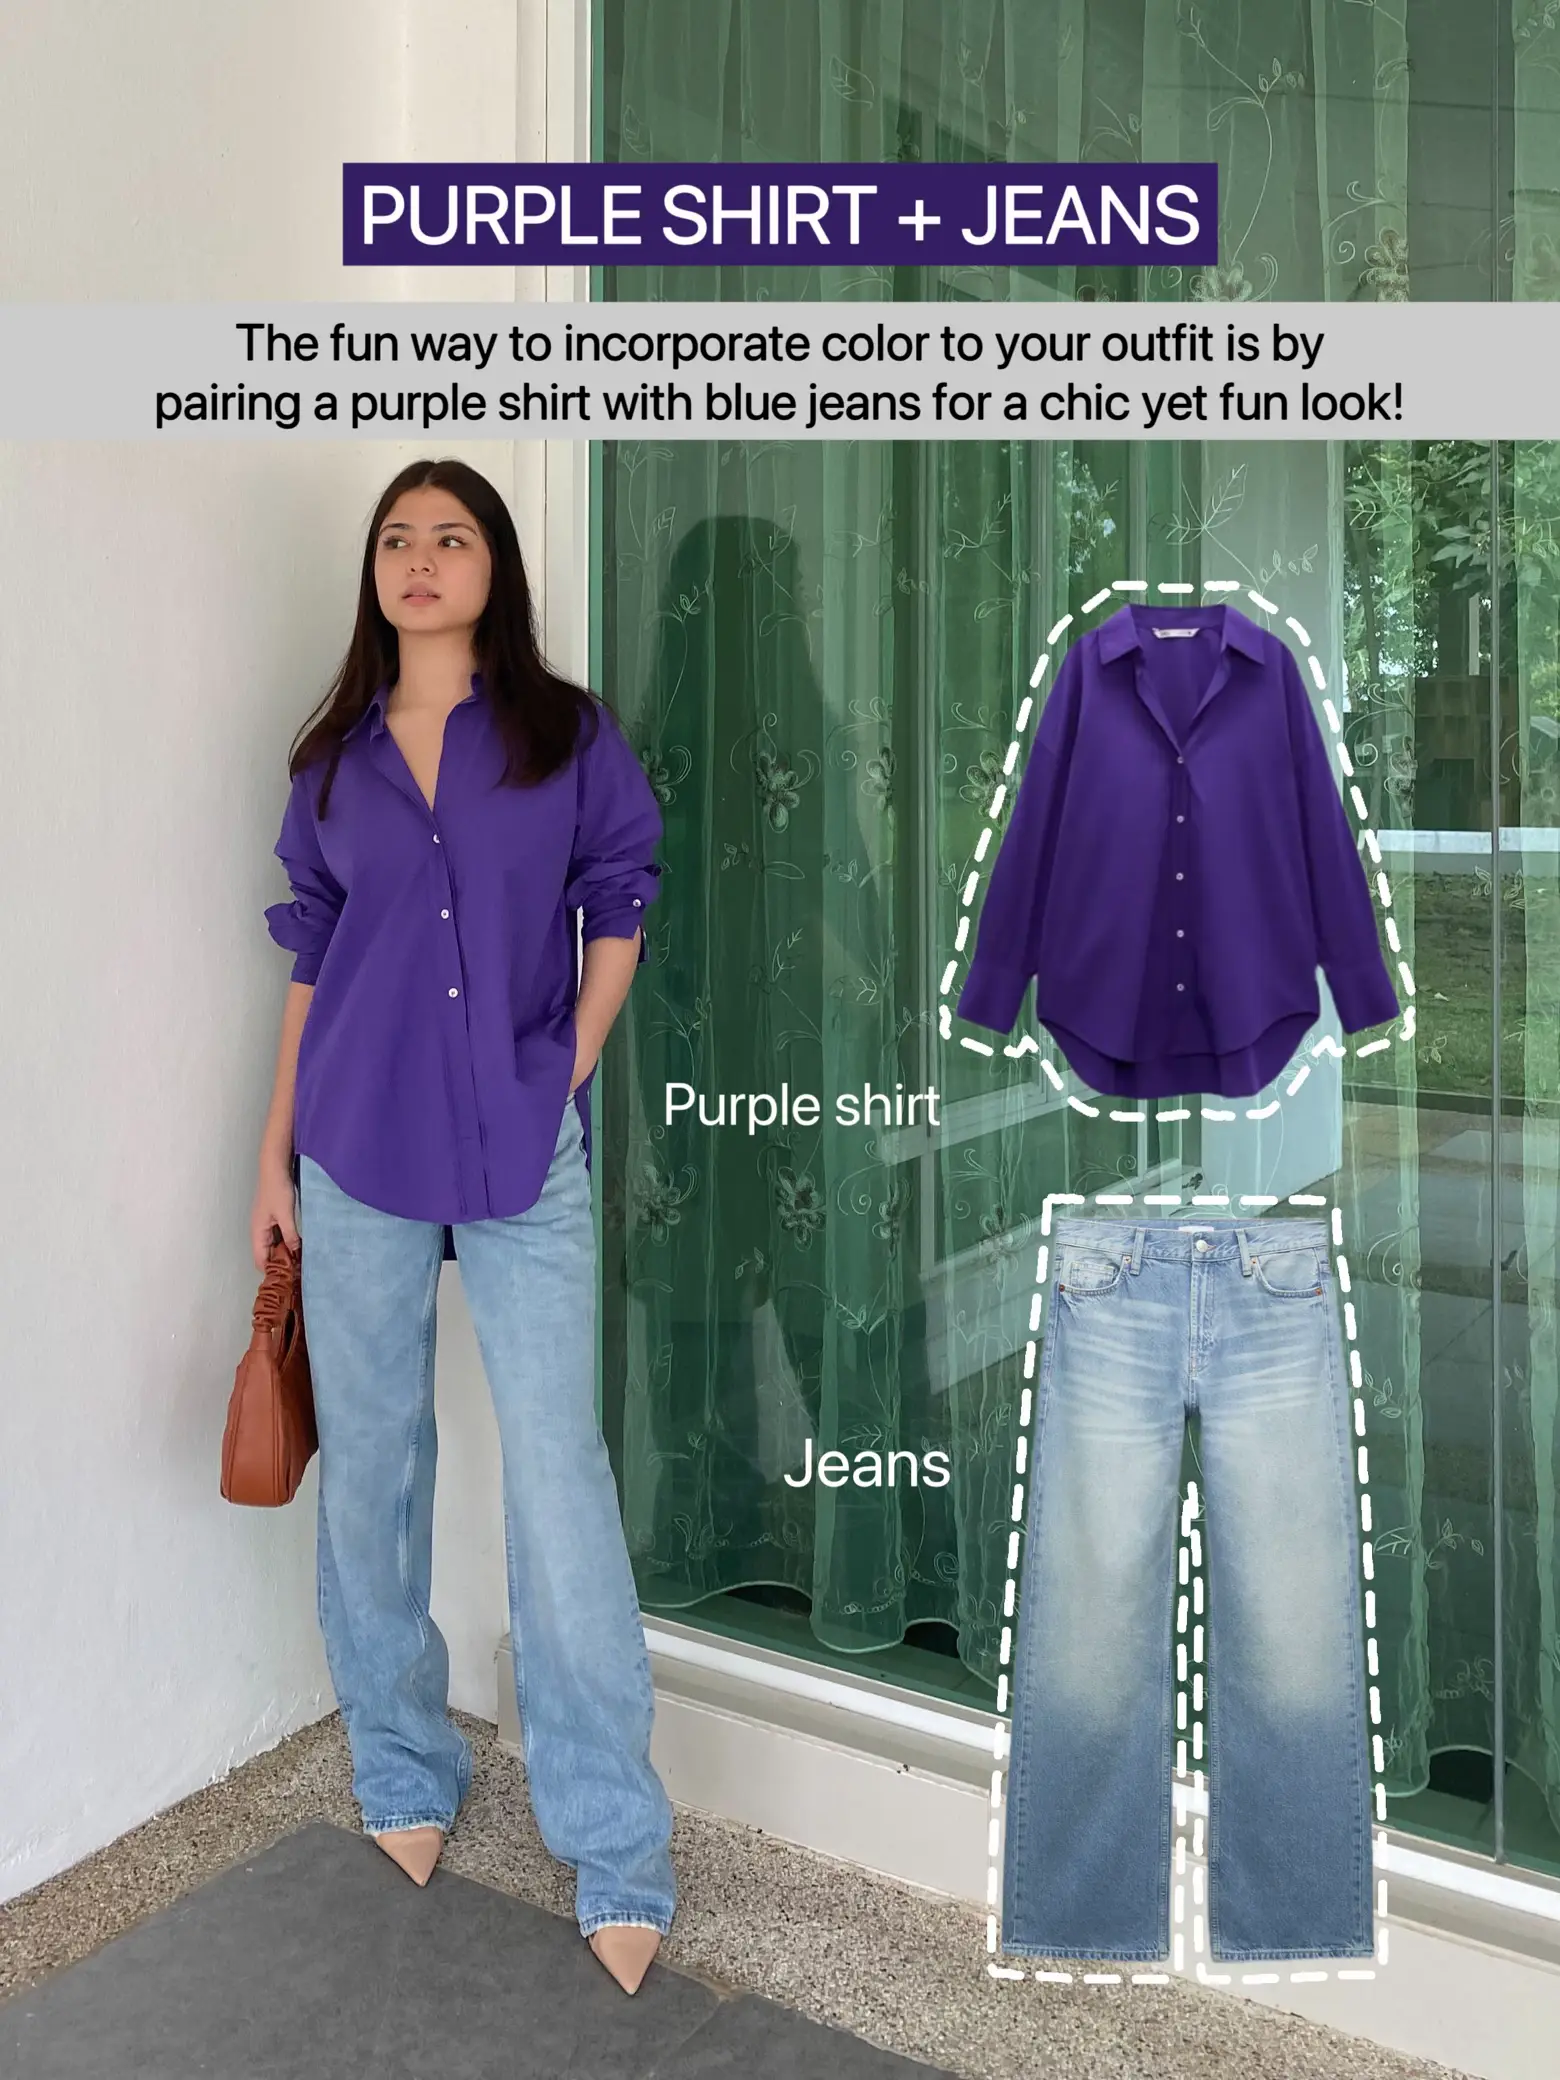 HOW TO STYLE YOUR SHIRT + JEANS TO LOOK STYLISH!